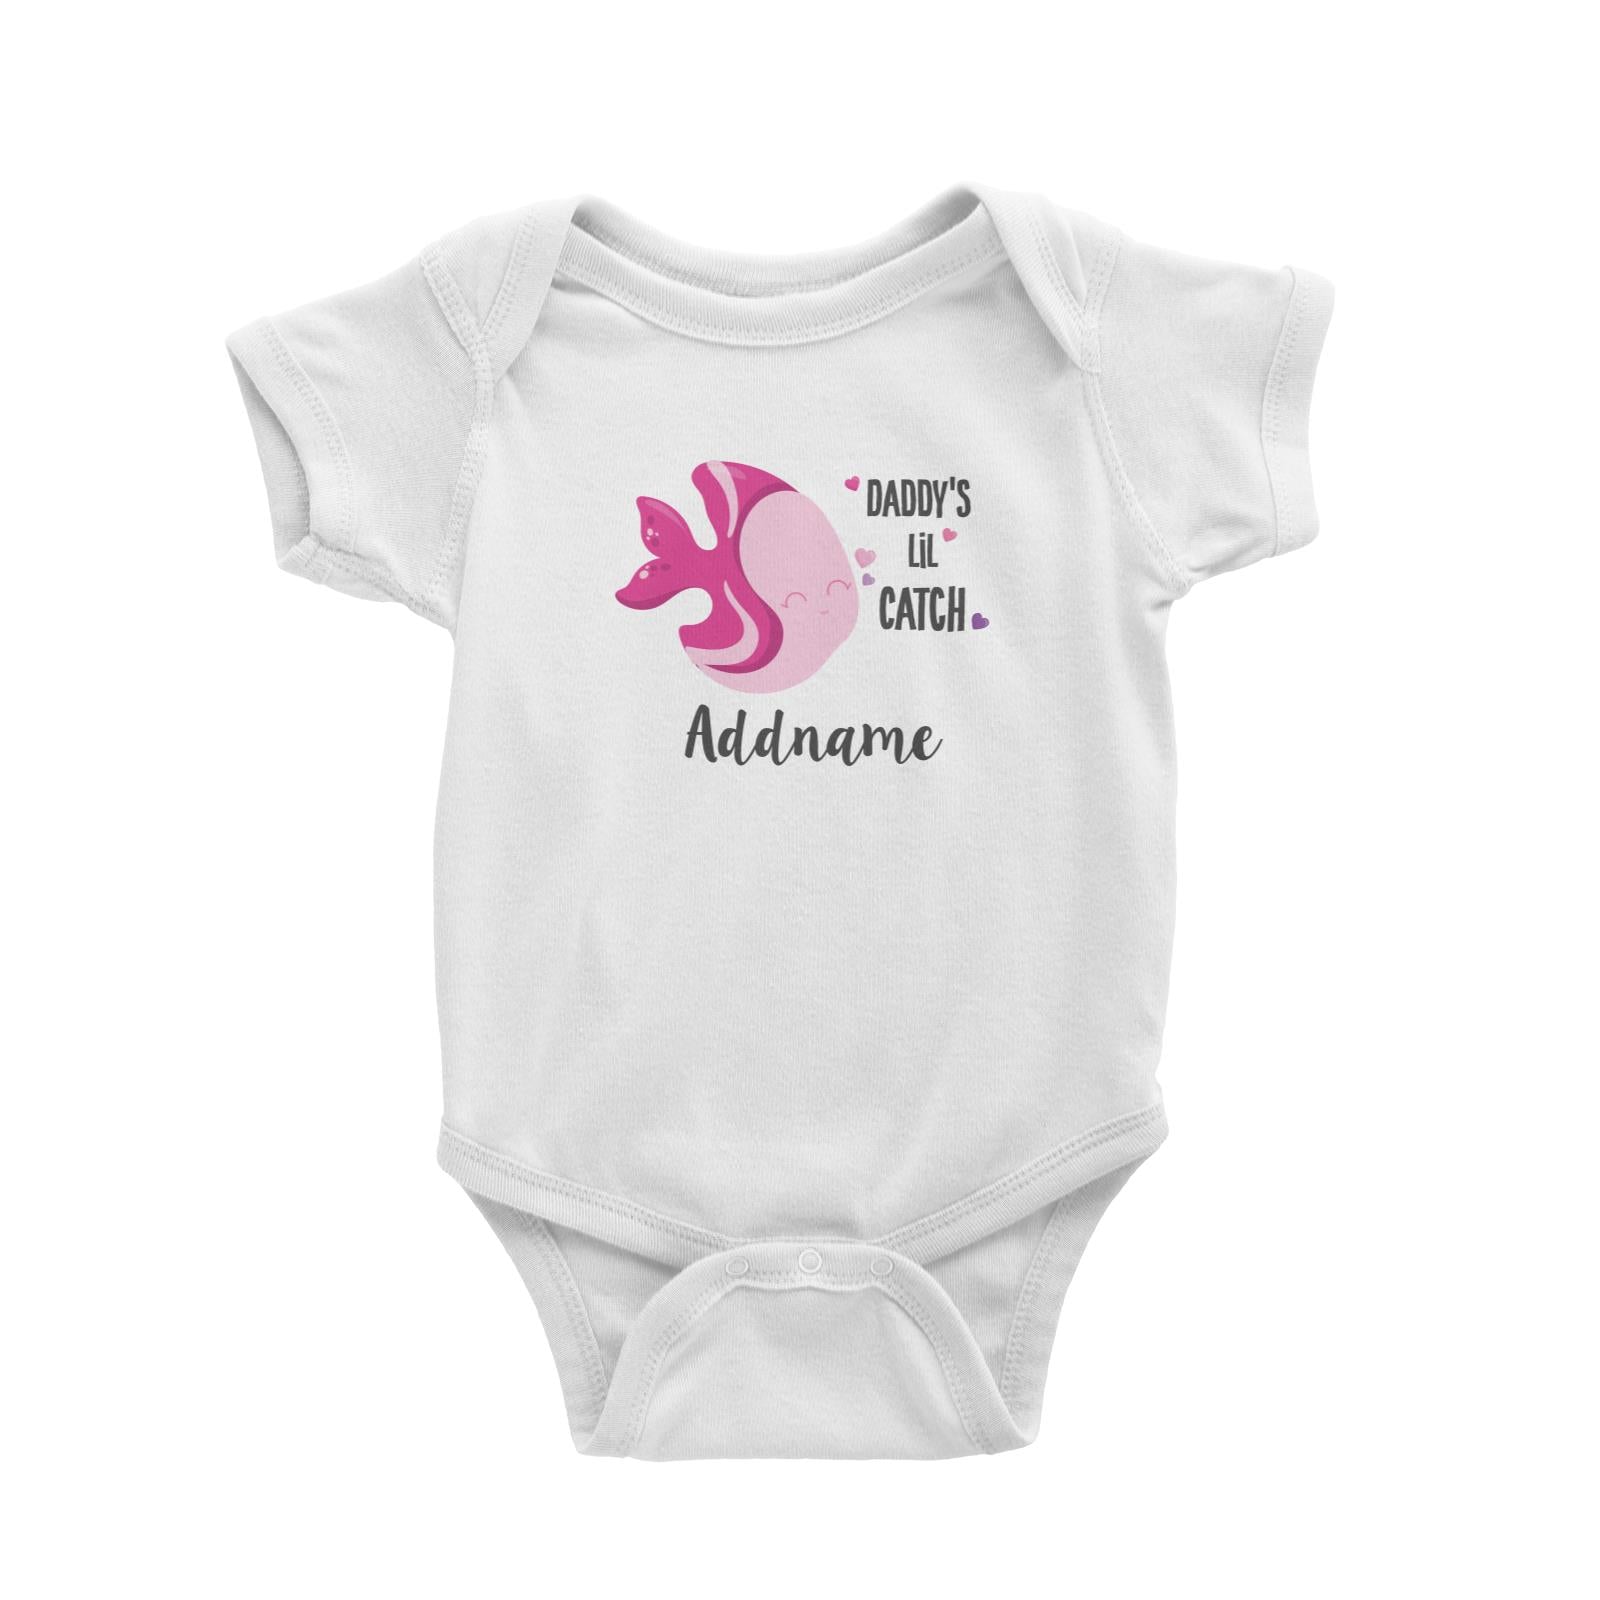 Cute Sea Animals Pink Fish Daddy's Lil Catch Addname White Baby Romper